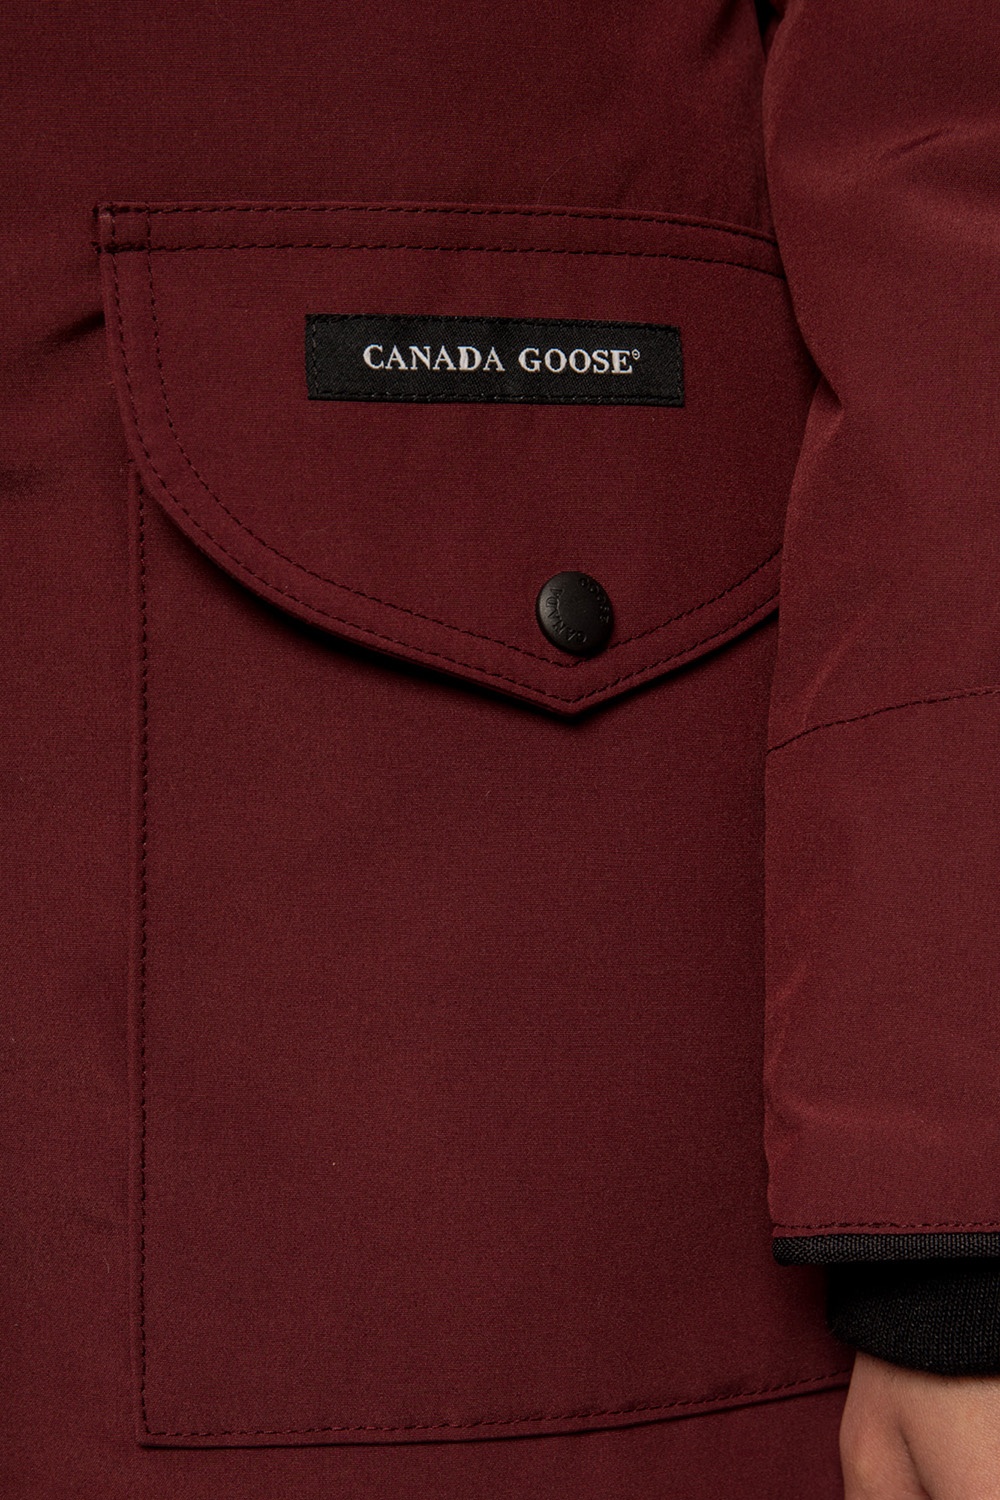 Canada Goose ‘Trillium’ logo-patched Stretched jacket